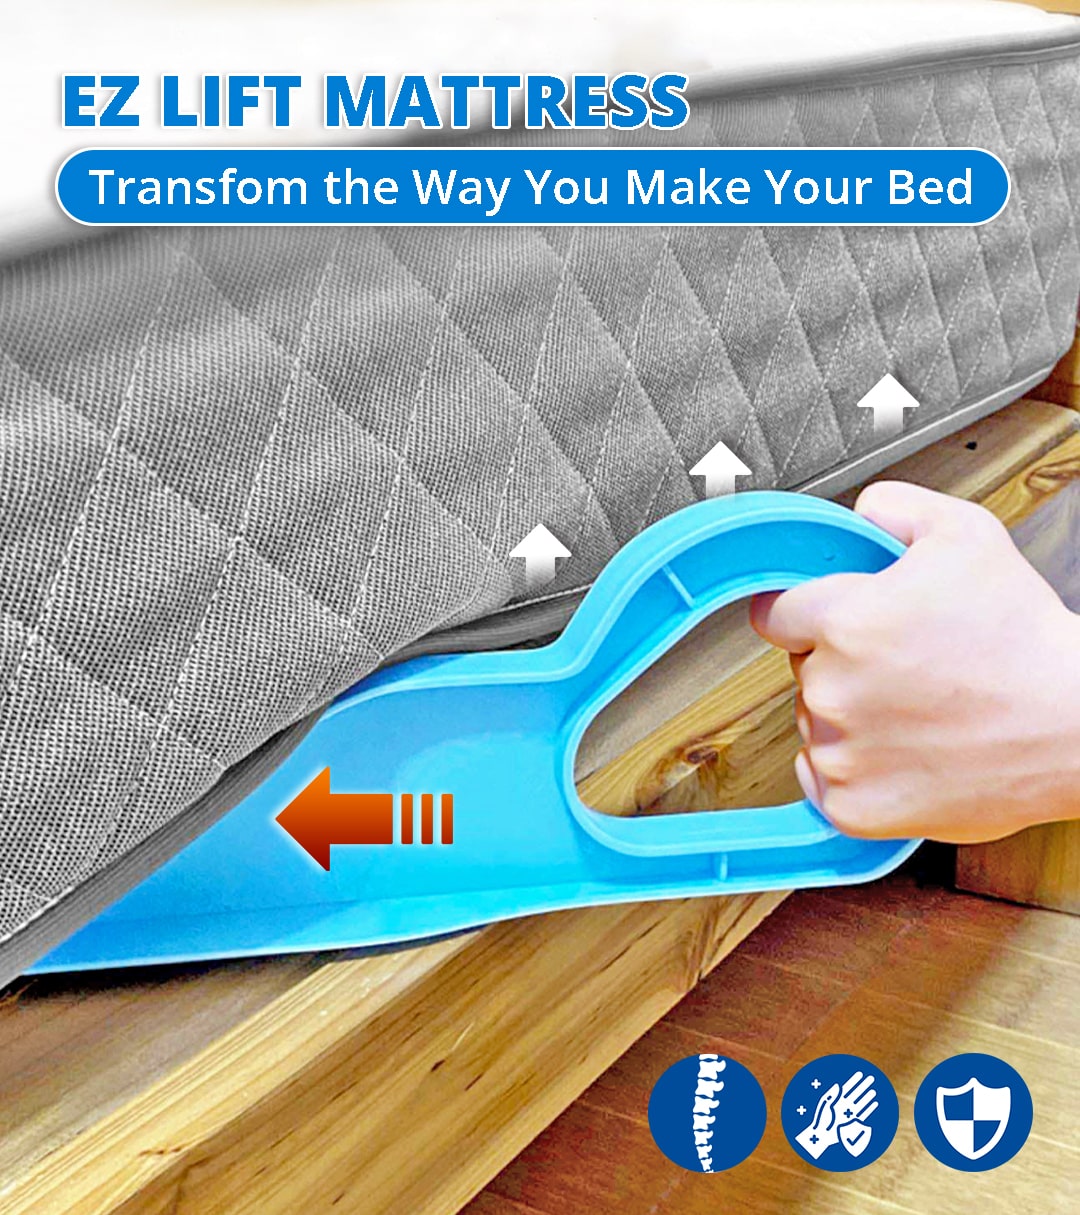 EZ Lift Mattress | Relief from physical discomfort and pain instantly